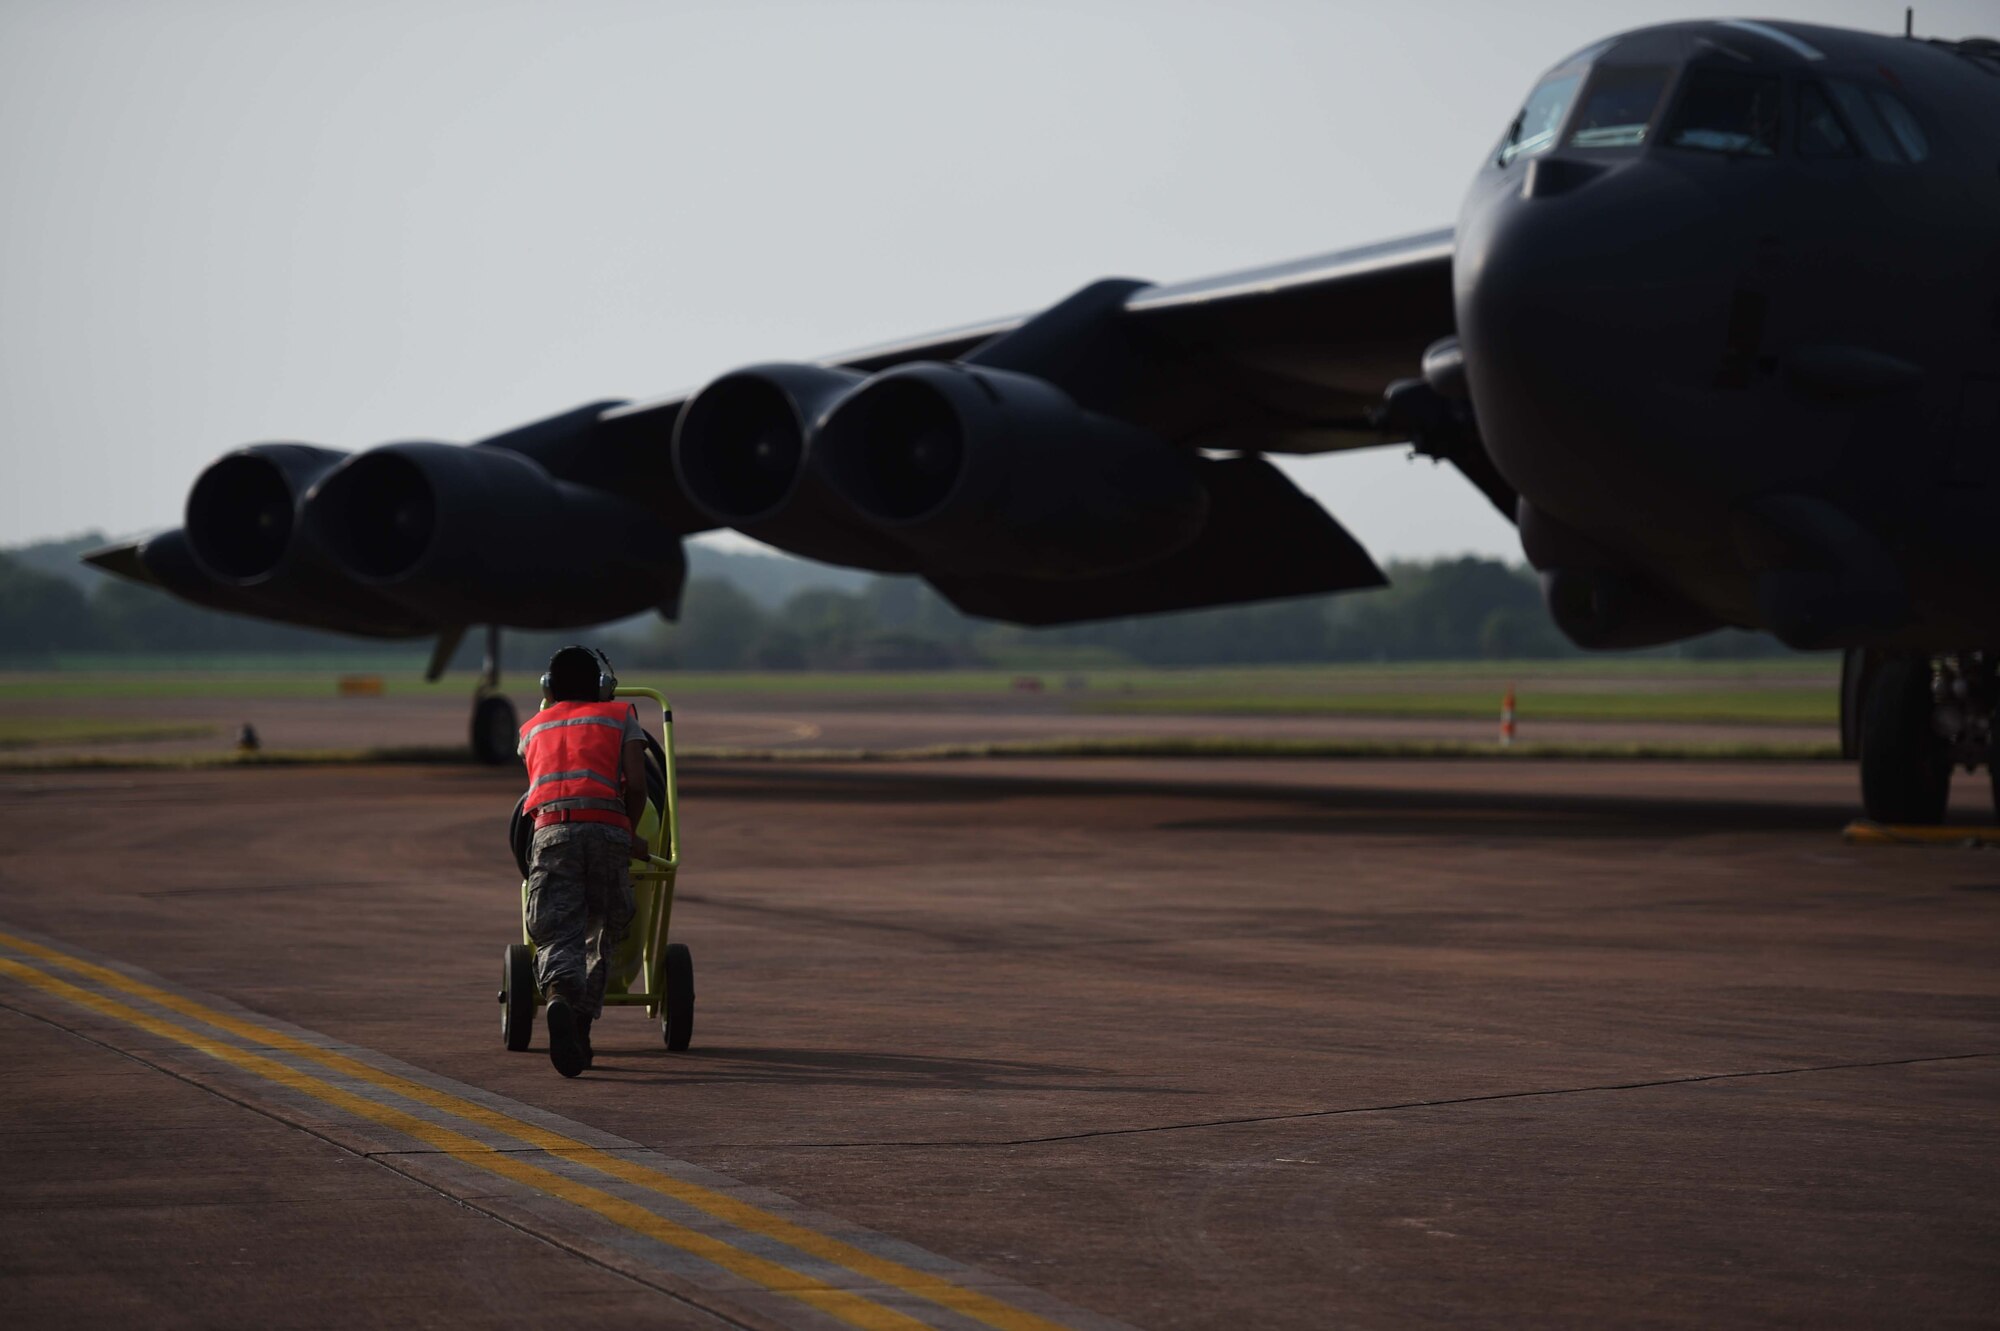 A maintenance Airman from Minot Air Force Base, N.D., runs to a B-52H Stratofortress as it parks on RAF Fairford, United Kingdom, June 7, 2016, after flying a training sortie in support of exercise BALTOPS 16. The mission trained the aircrew on air interdiction and interoperability with sister services and partner nations. (U.S. Air Force photo by Airman 1st Class Zachary Bumpus)